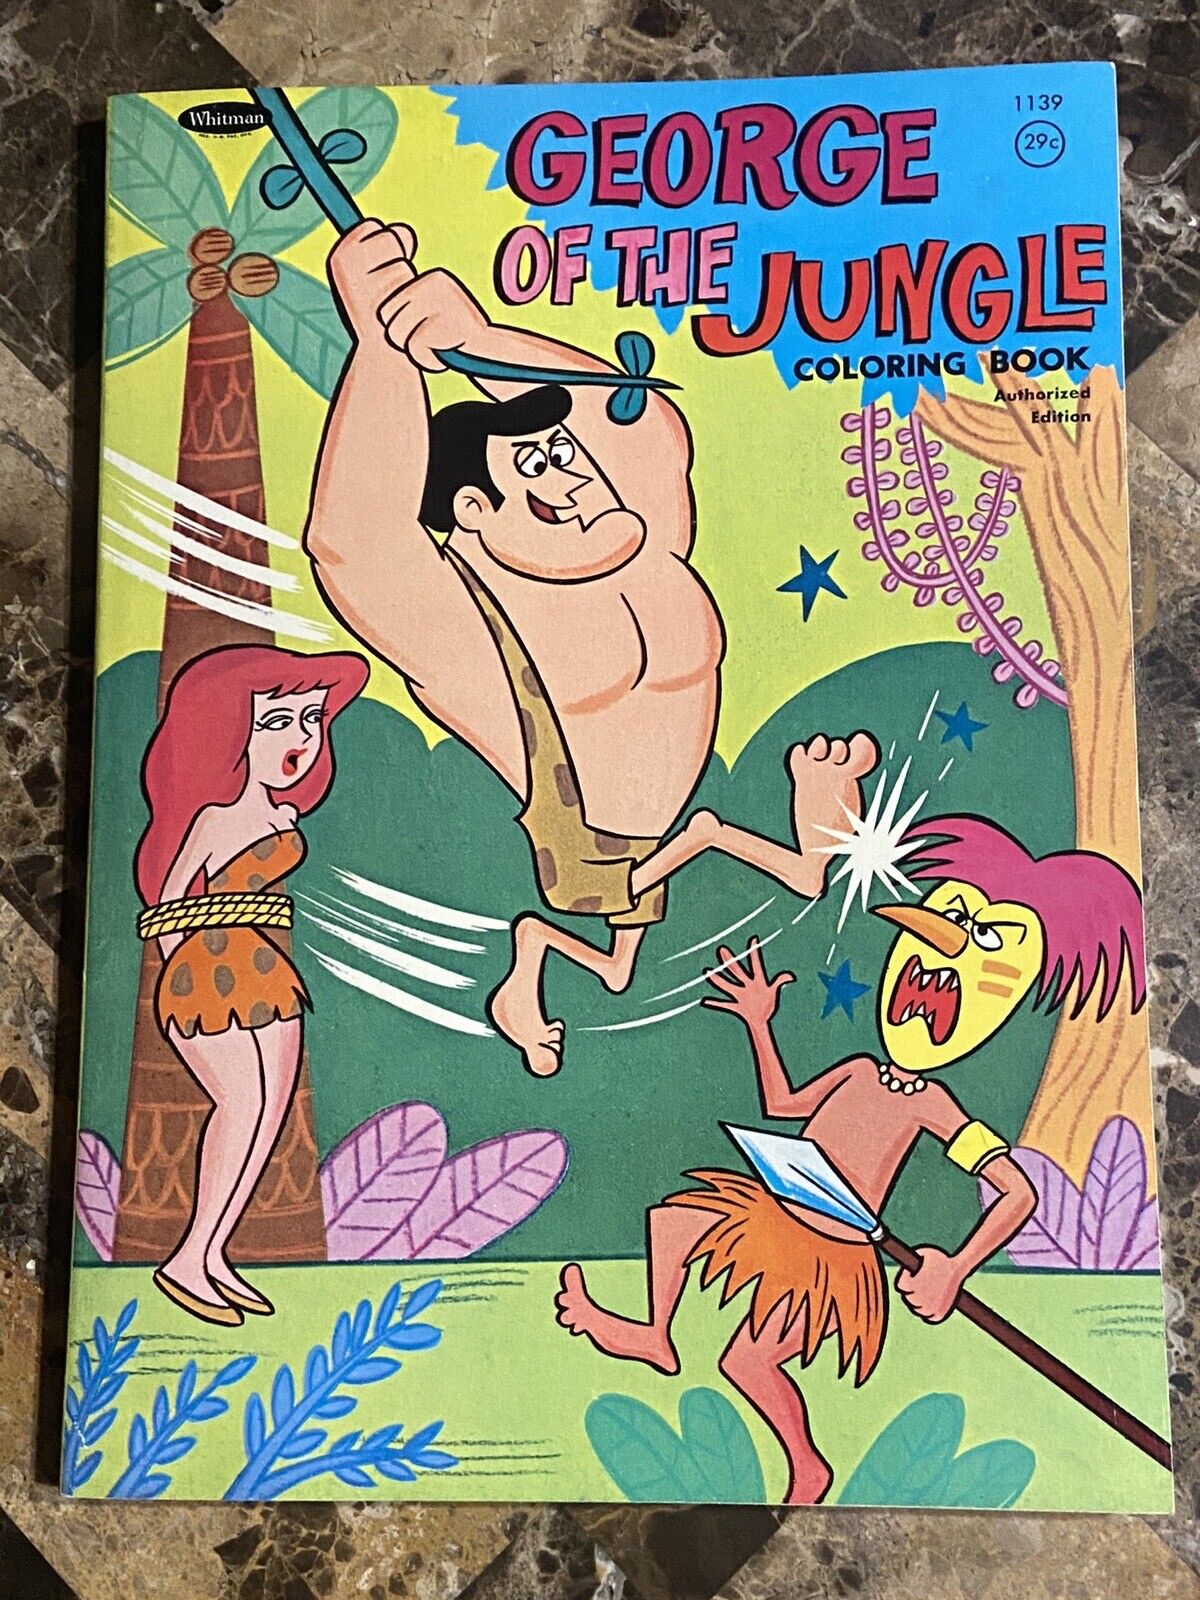 ORIGINAL 1969 WHITMAN GEORGE OF THE JUNGLE COLORING BOOK UNUSED MINTY